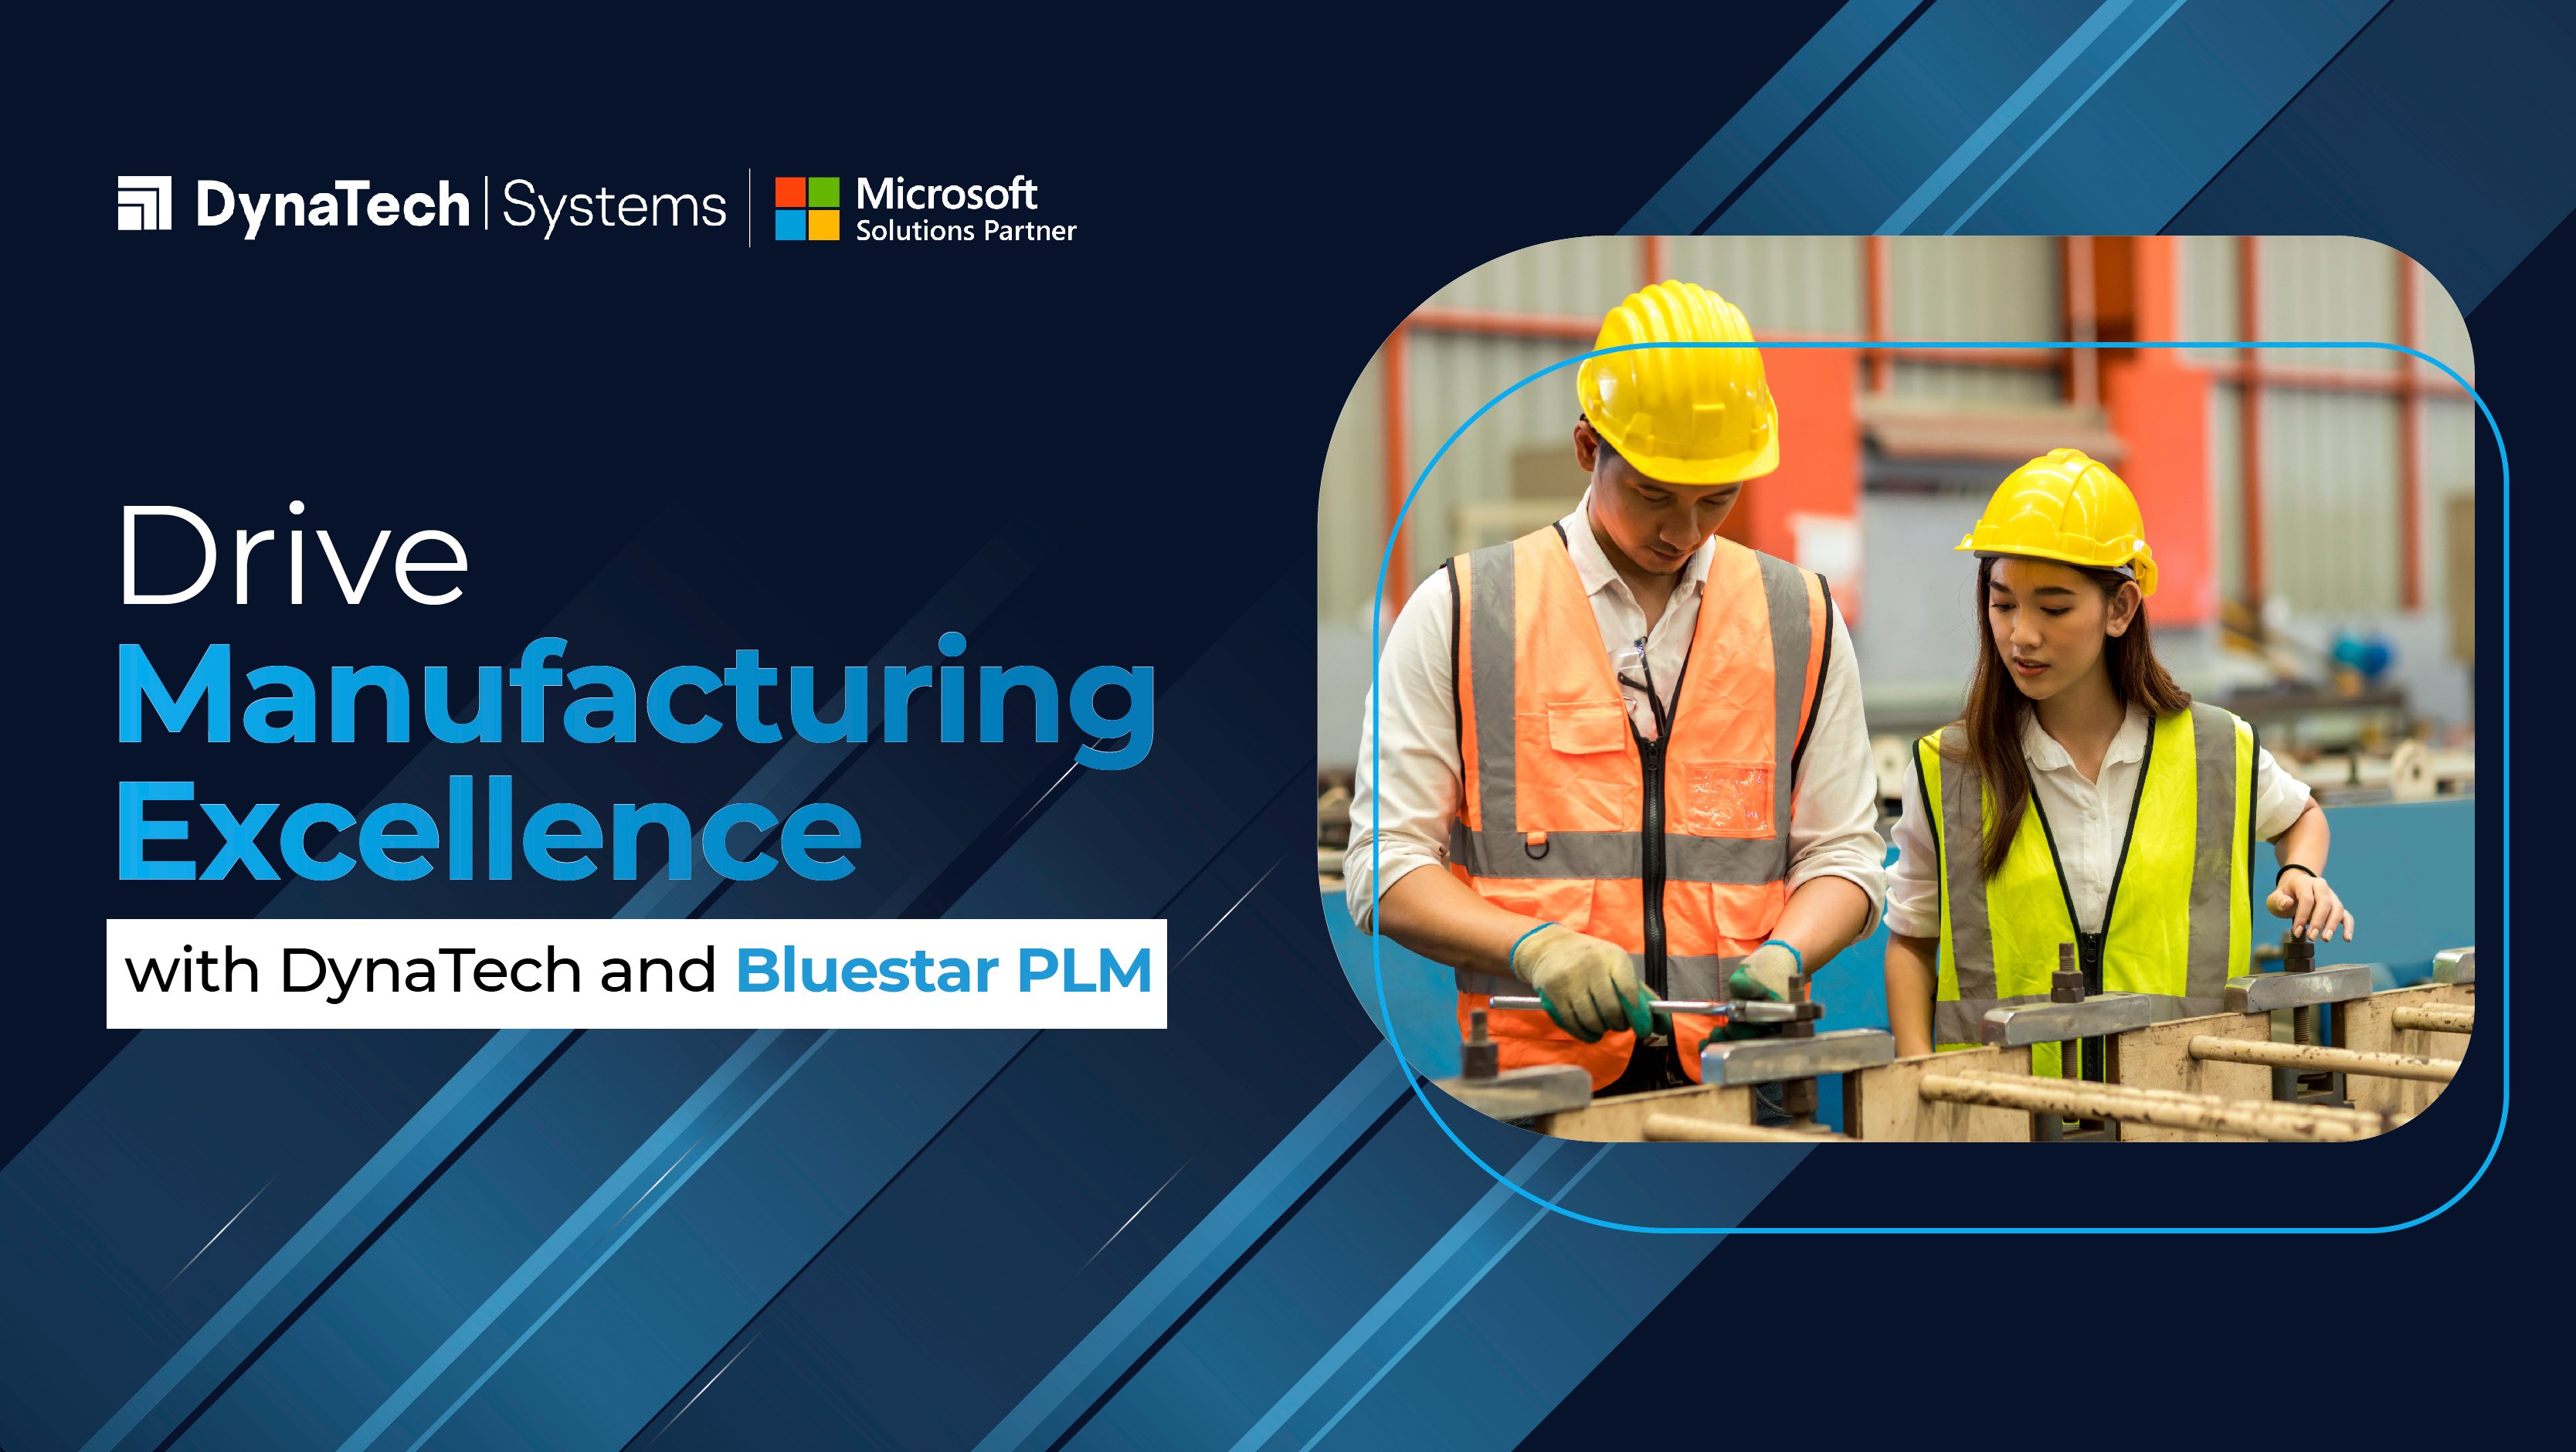 Drive Manufacturing Excellence: Discover How Our Partnership with Bluestar PLM Can Boost Your Business!